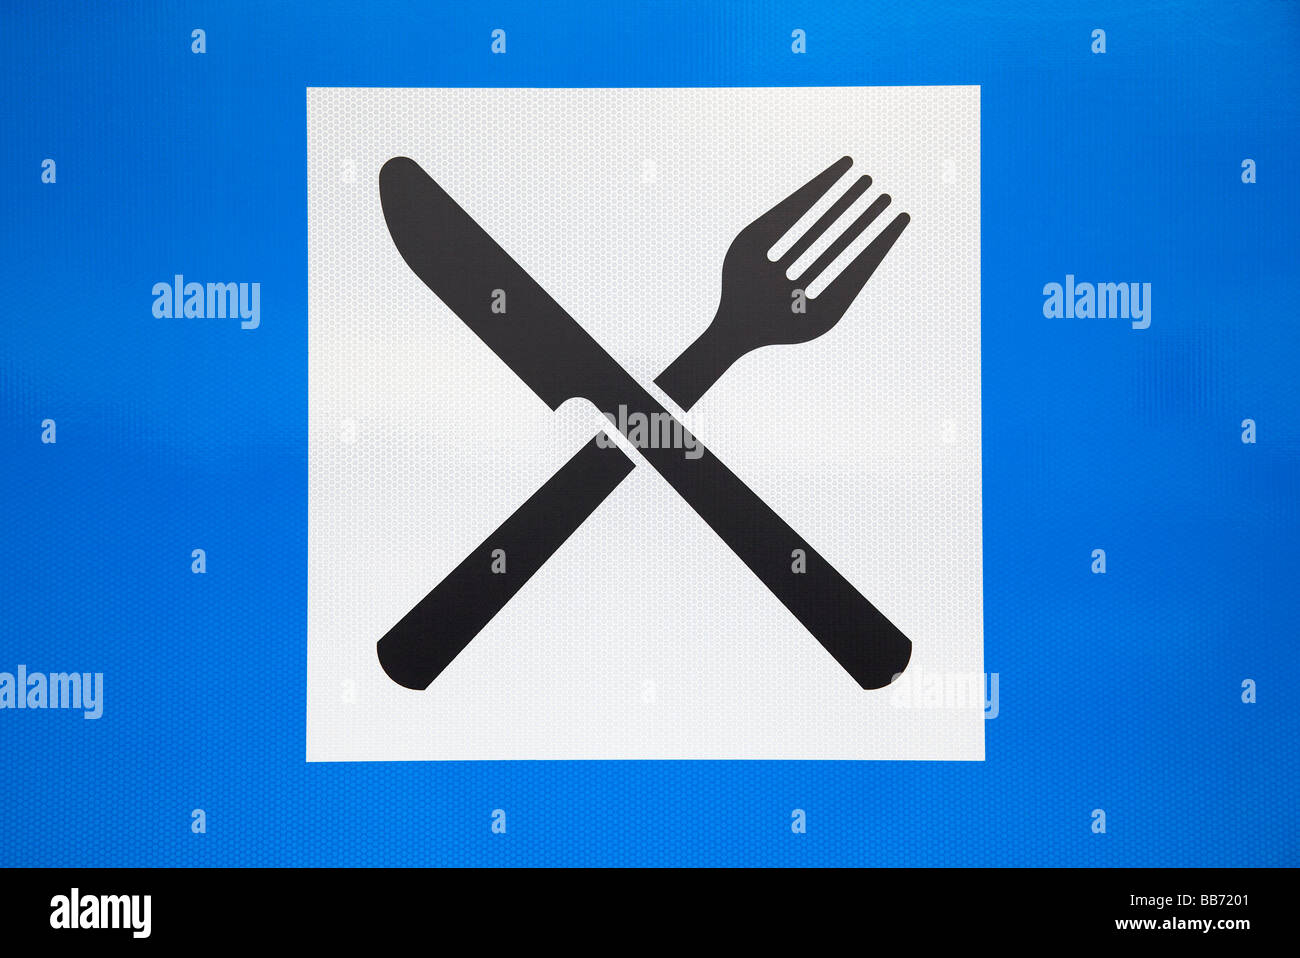 Knife and fork sign Stock Photo